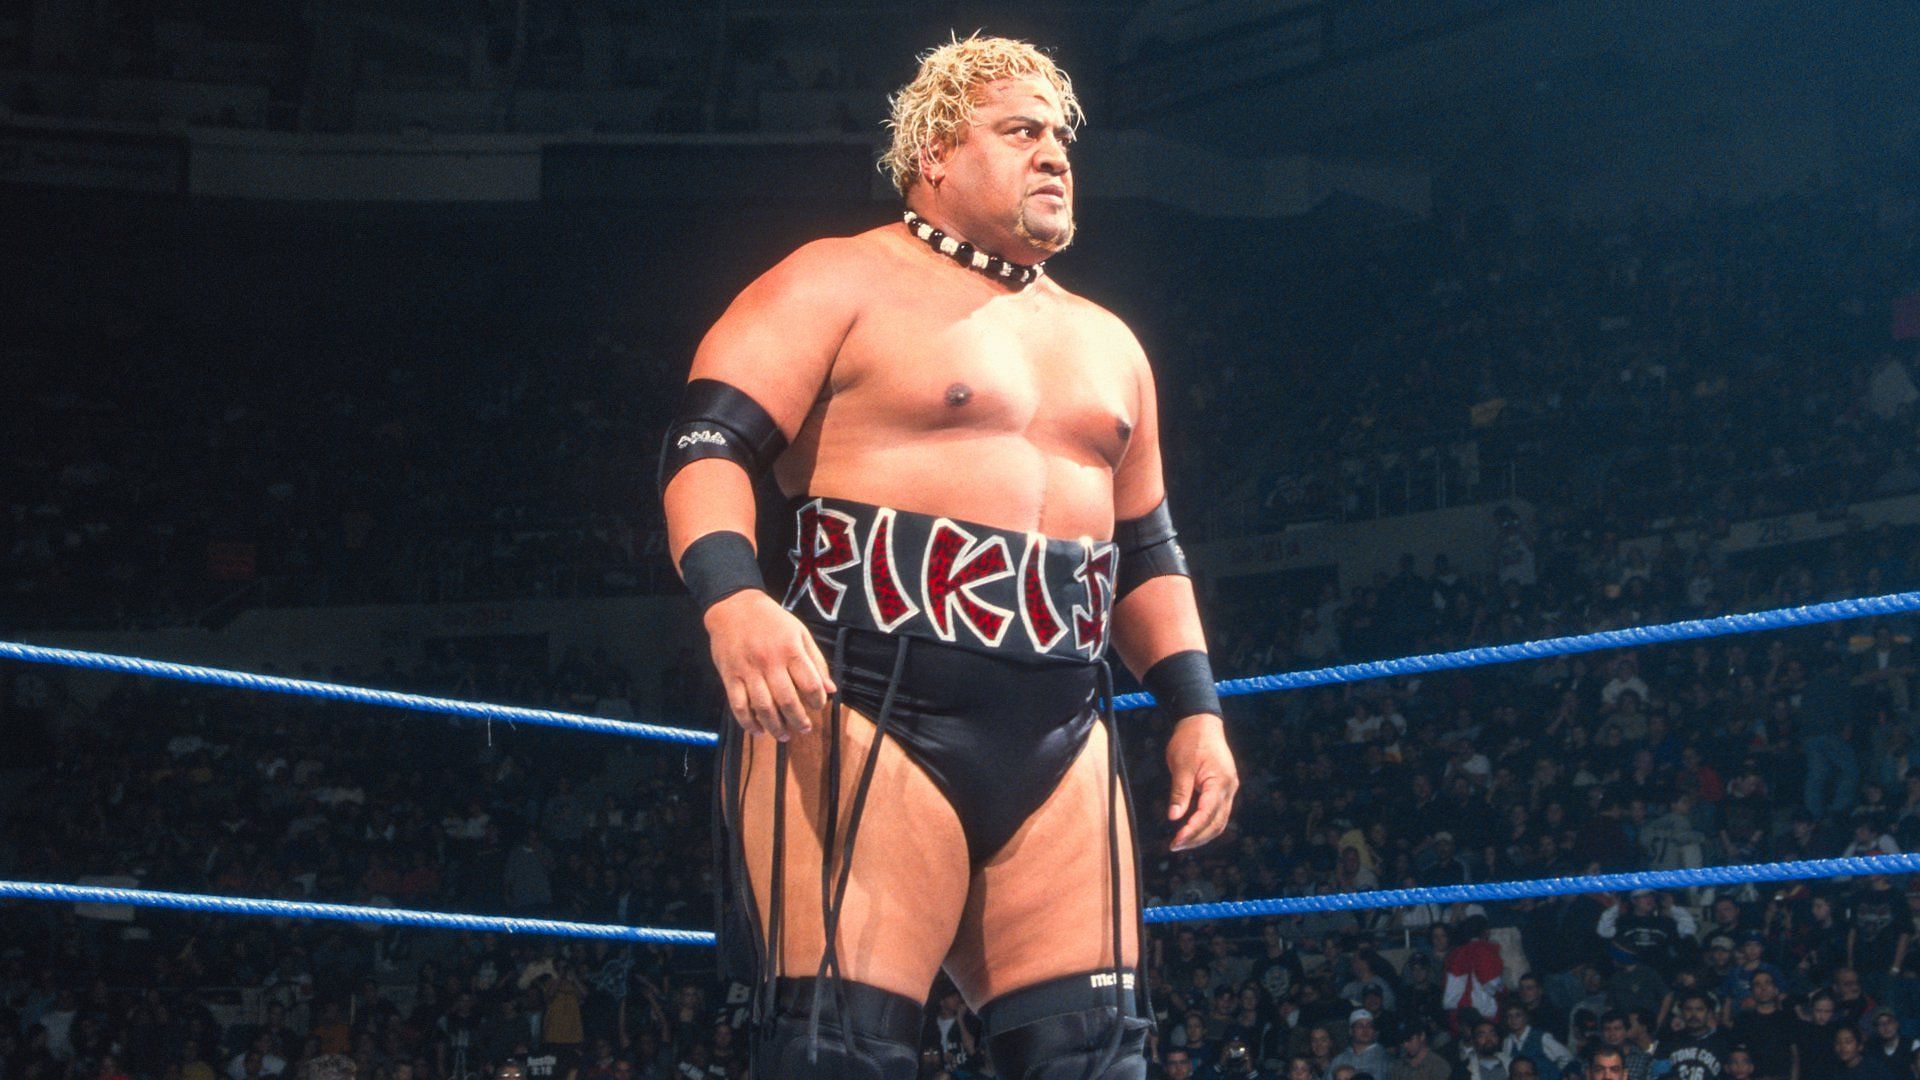 Rikishi stands tall in the WWE ring after a win